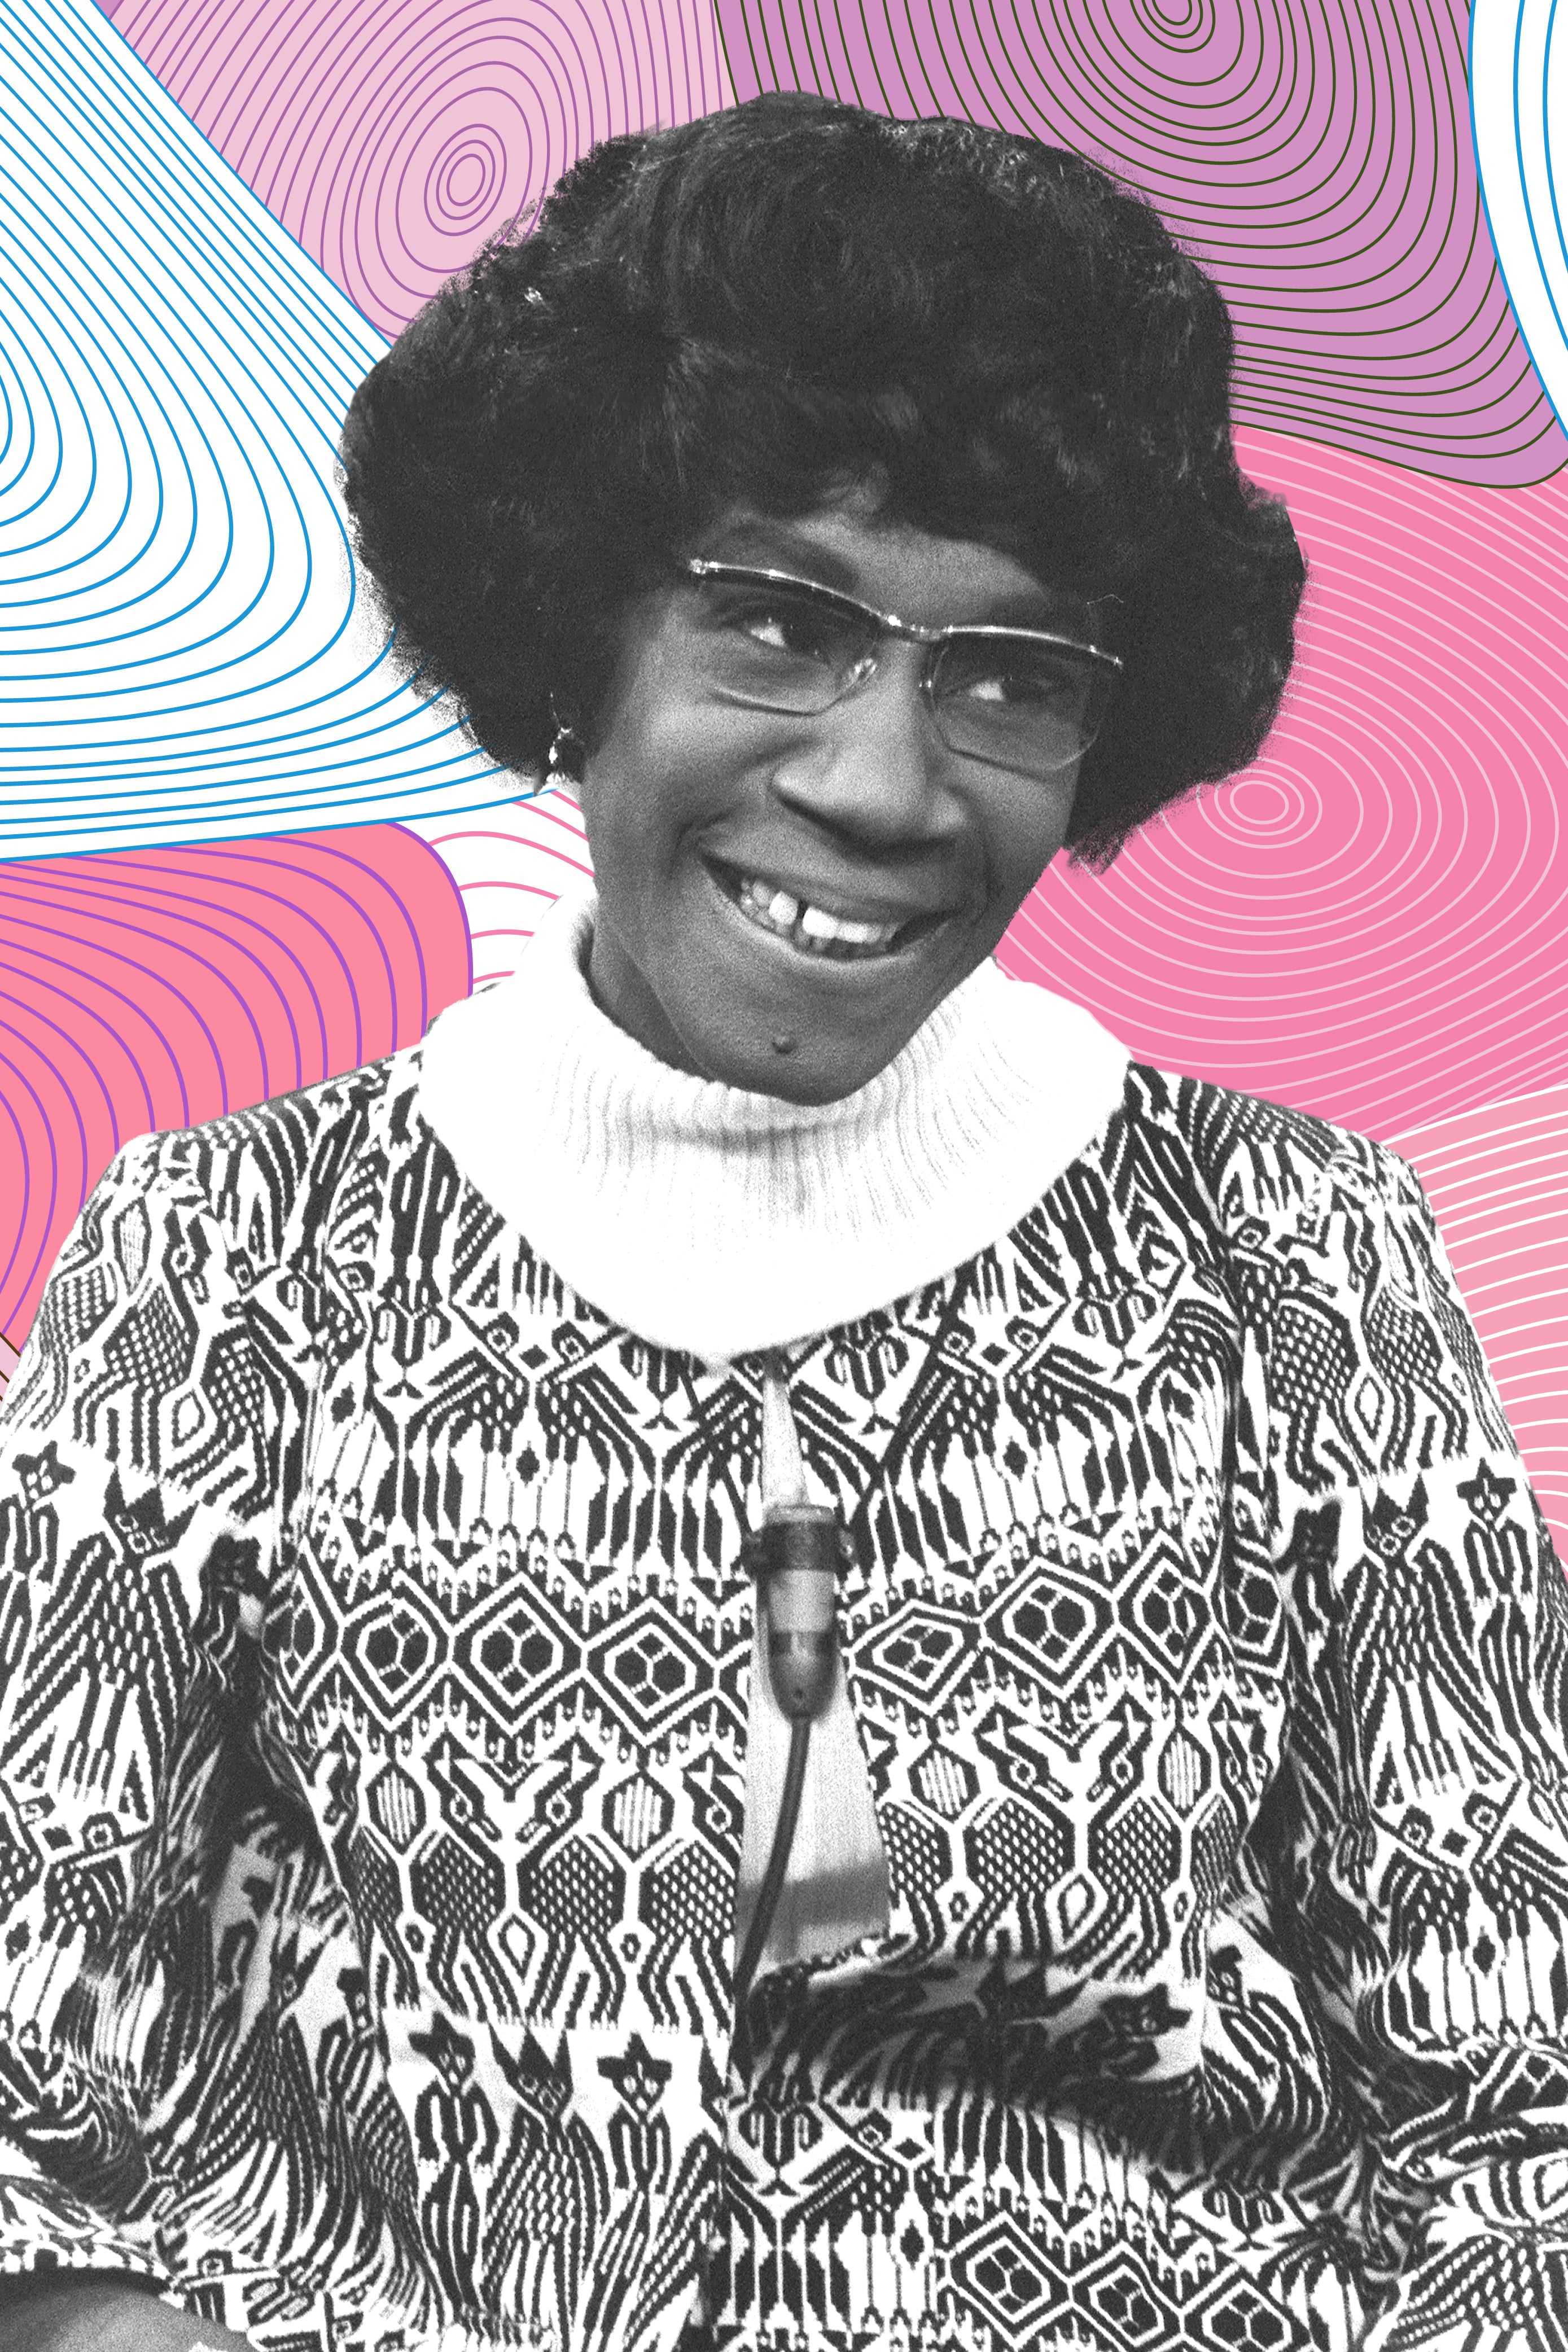 In Honor Of Shirley Chisholm, Let’s Elect Leaders Who Speak Truth